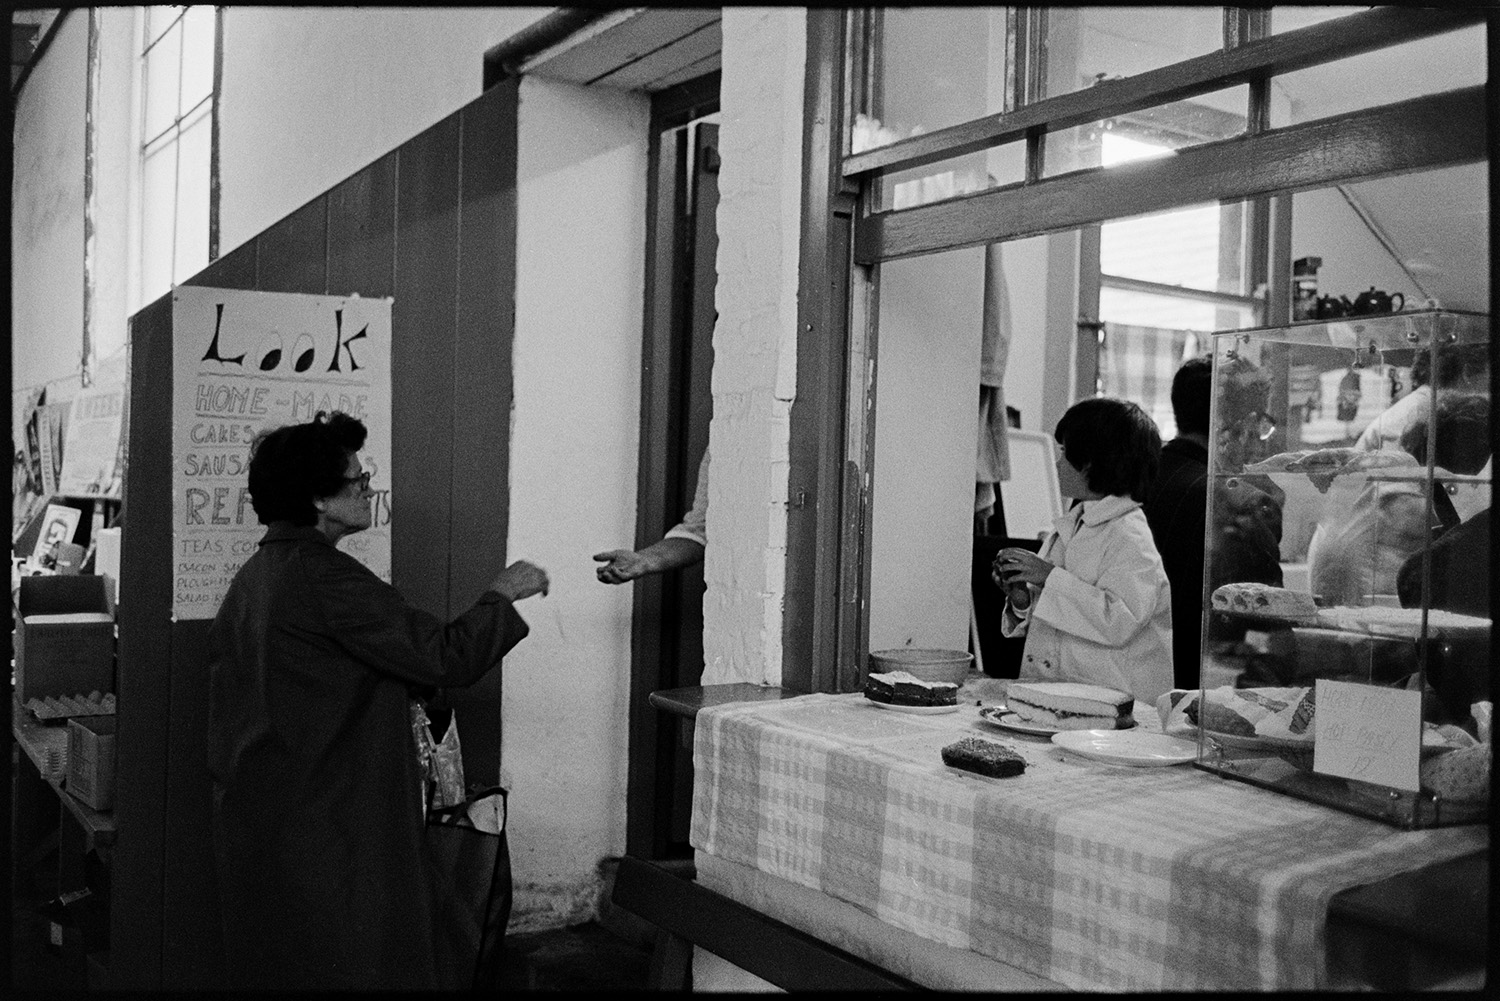 Stalls at Pannier Market, food, clothes. 
[A woman paying for cakes at a shop doorway in Bideford Pannier Market. A child is stood behind the shop hatch and cakes are on display.]